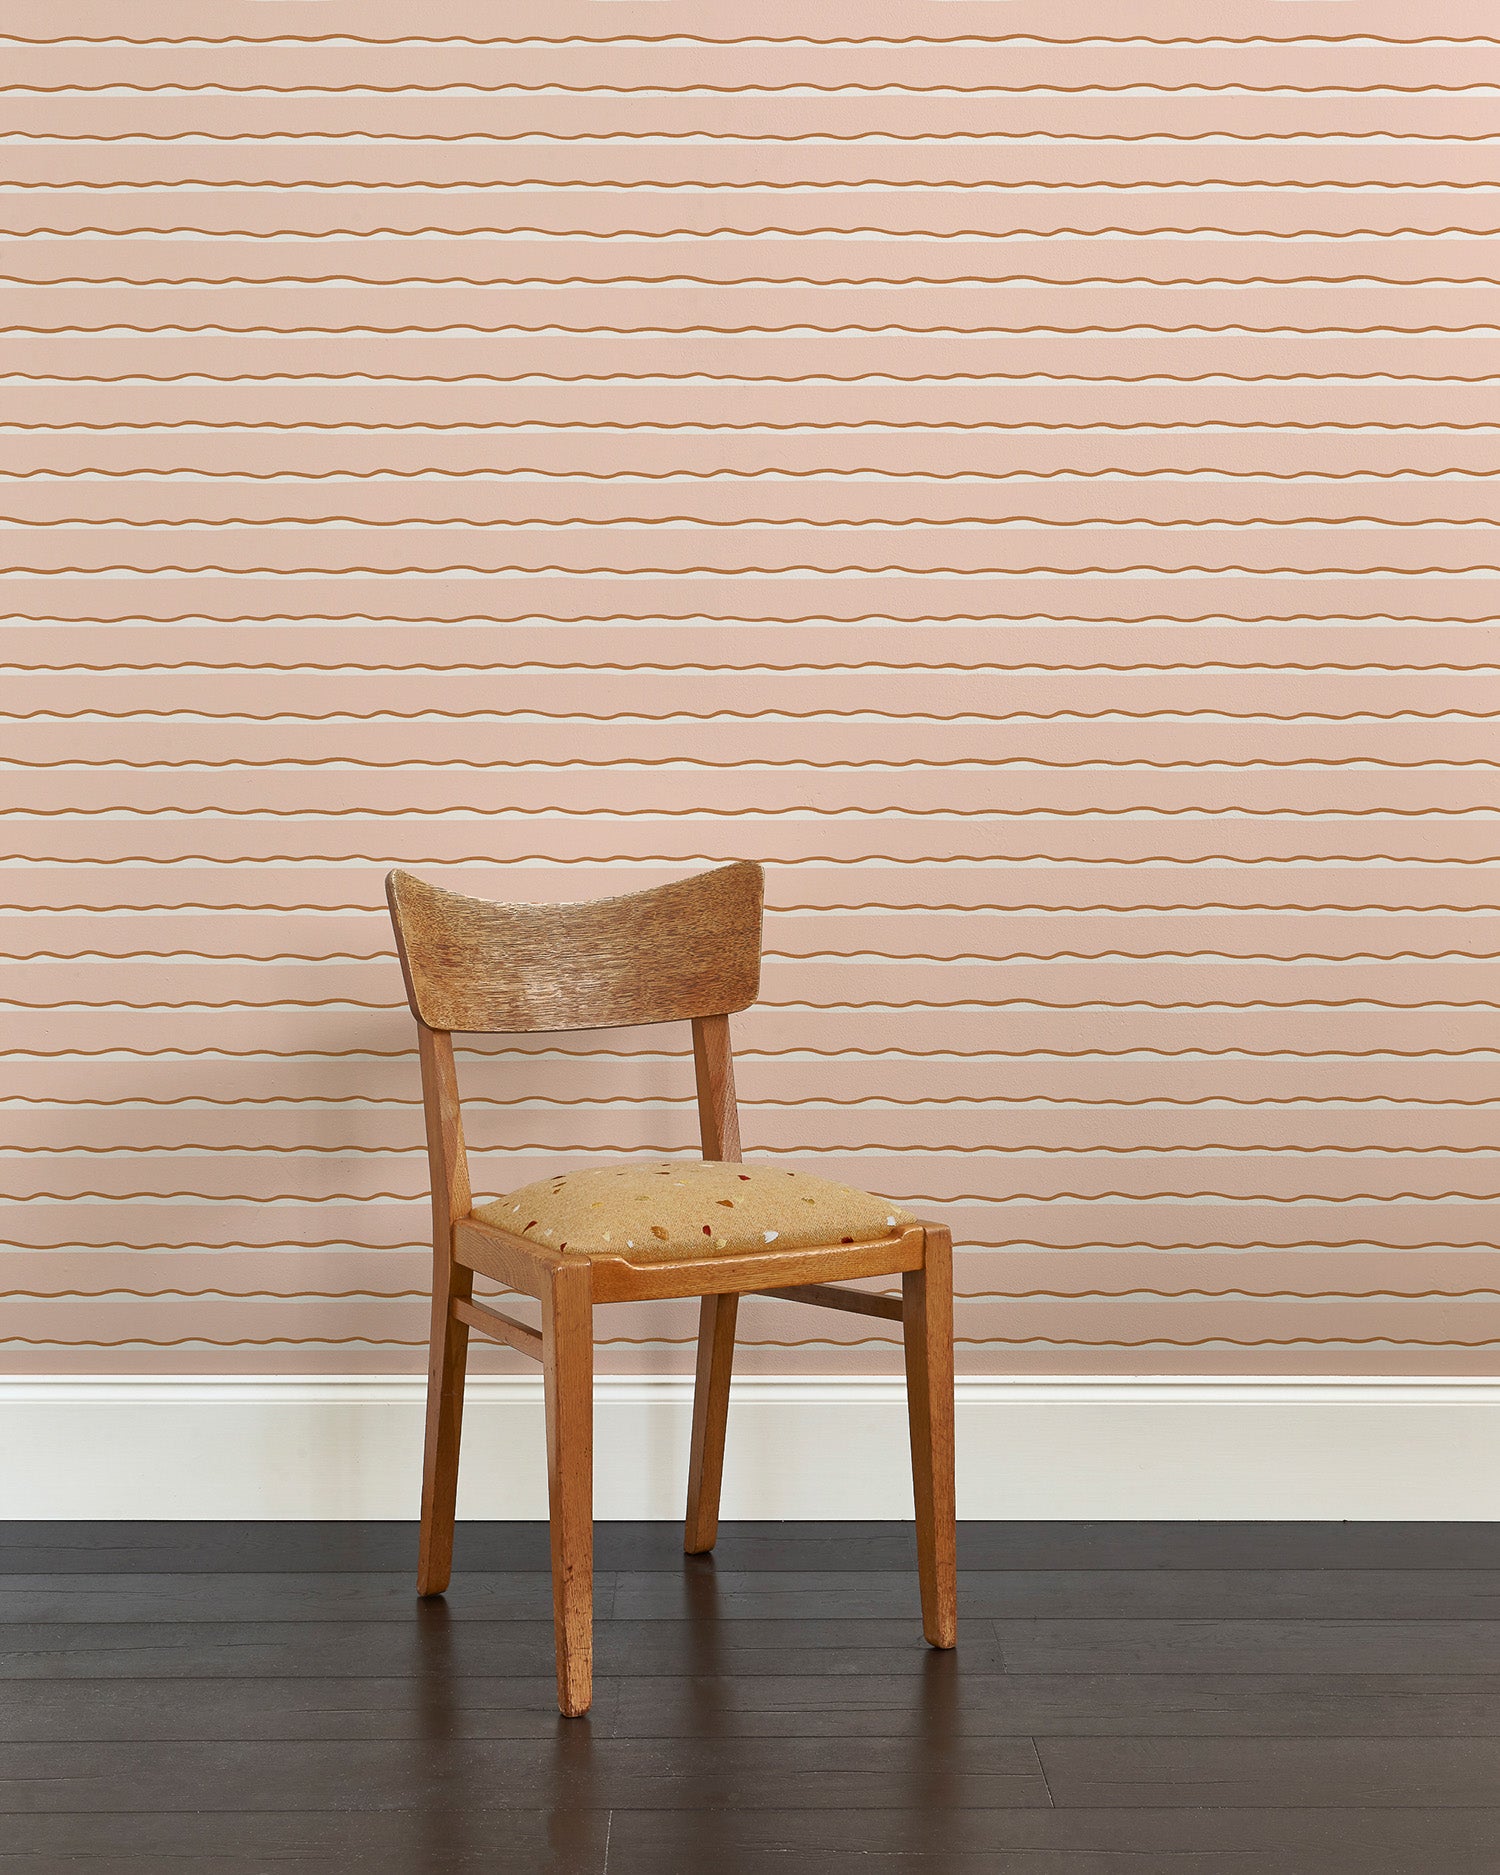 A wooden chair stands in front of a wall papered in an undulating stripe pattern in pink, white and rust.